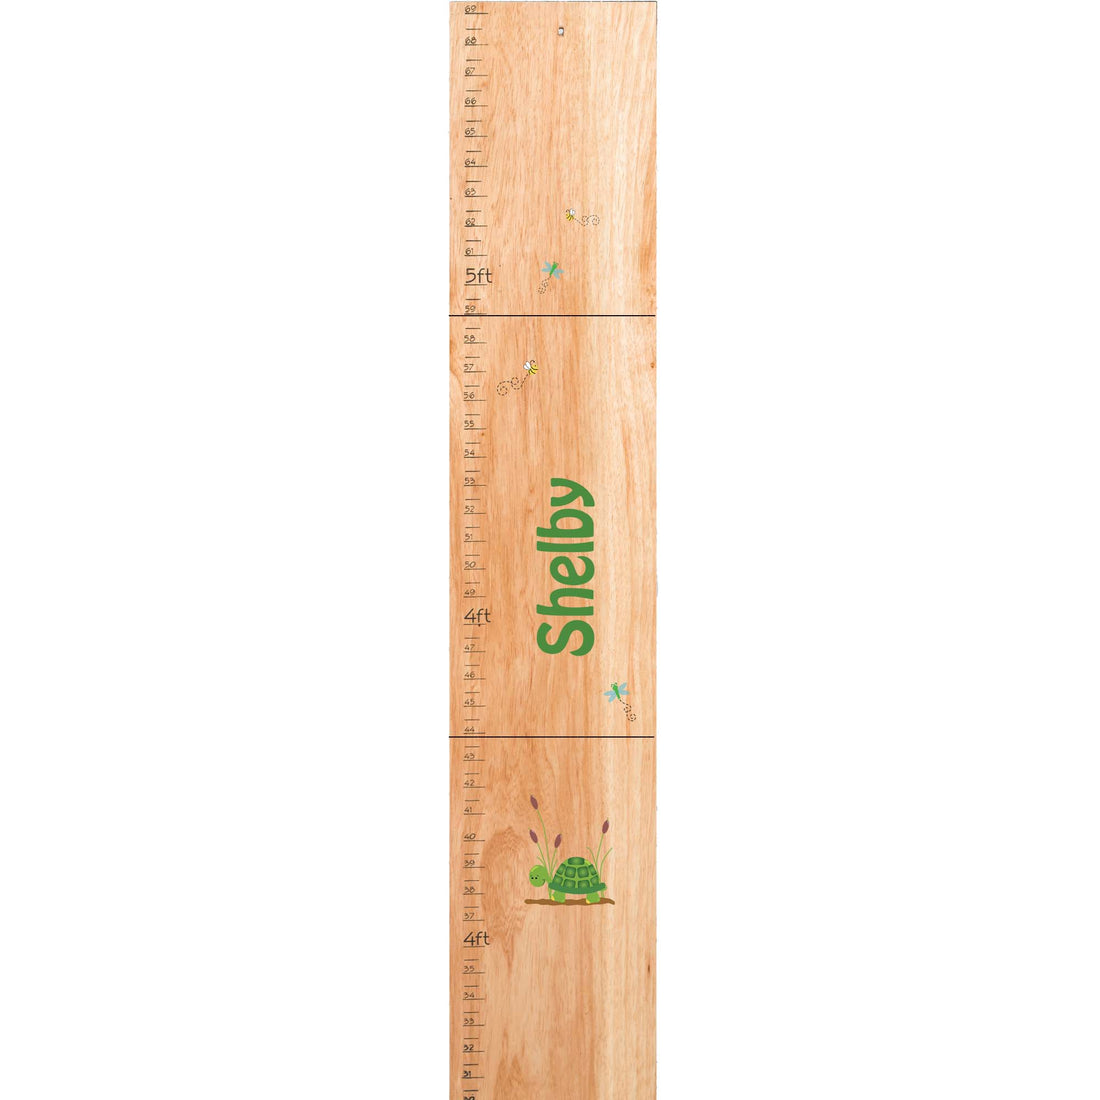 Personalized Natural Growth Chart With Turtle Design